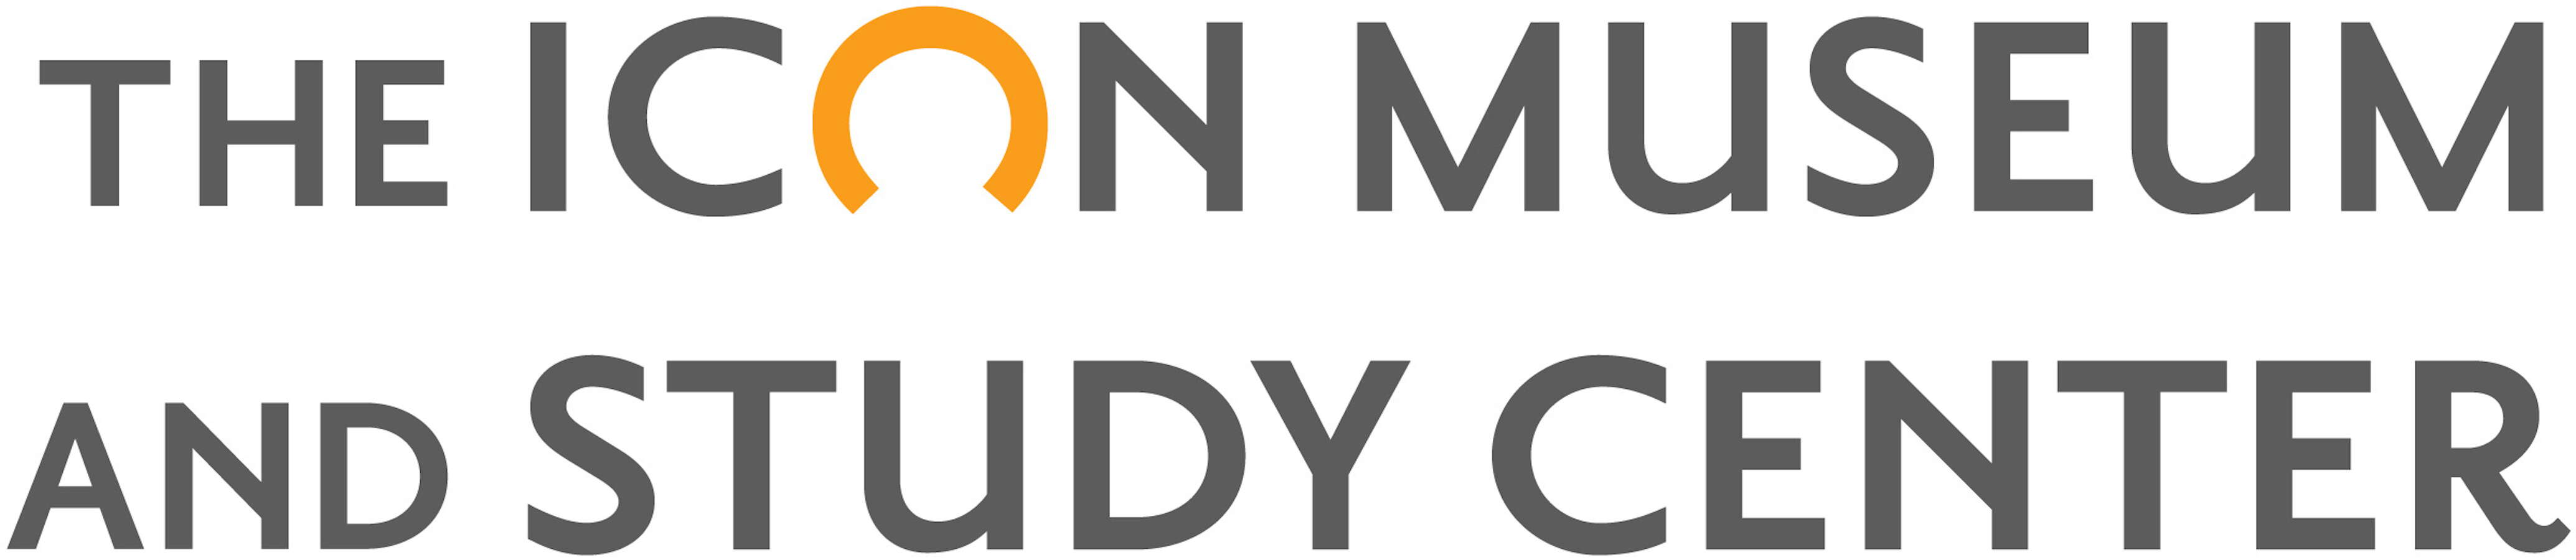 The Icon Museum and Study Center logo. The O is reminiscent of a halo.